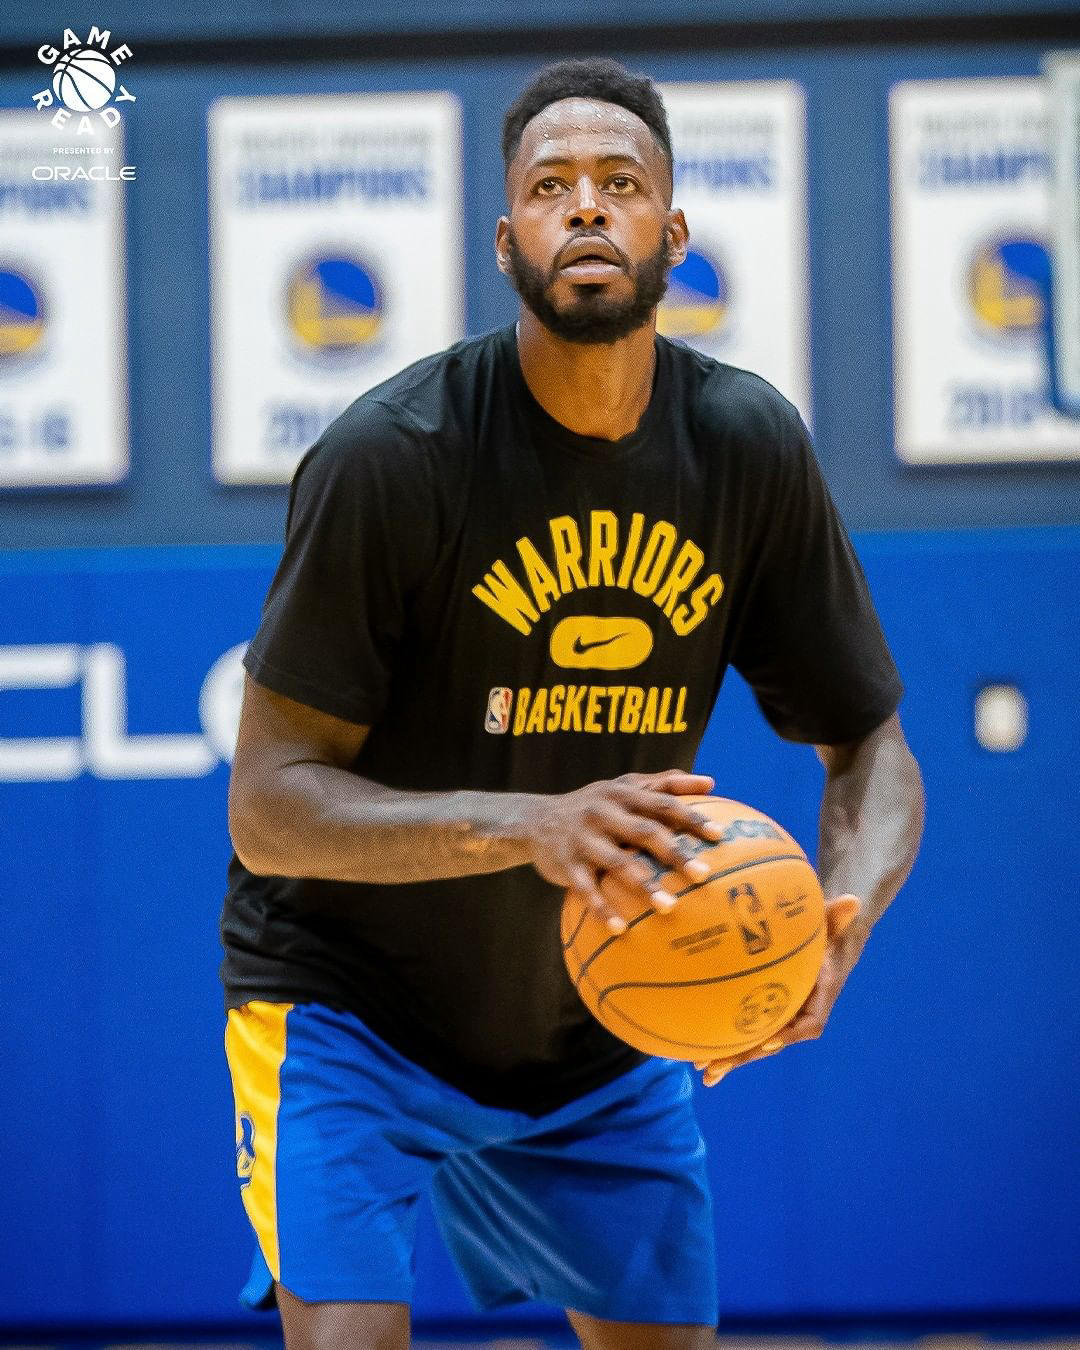 Golden State Warriors - Focused on the work #oracle